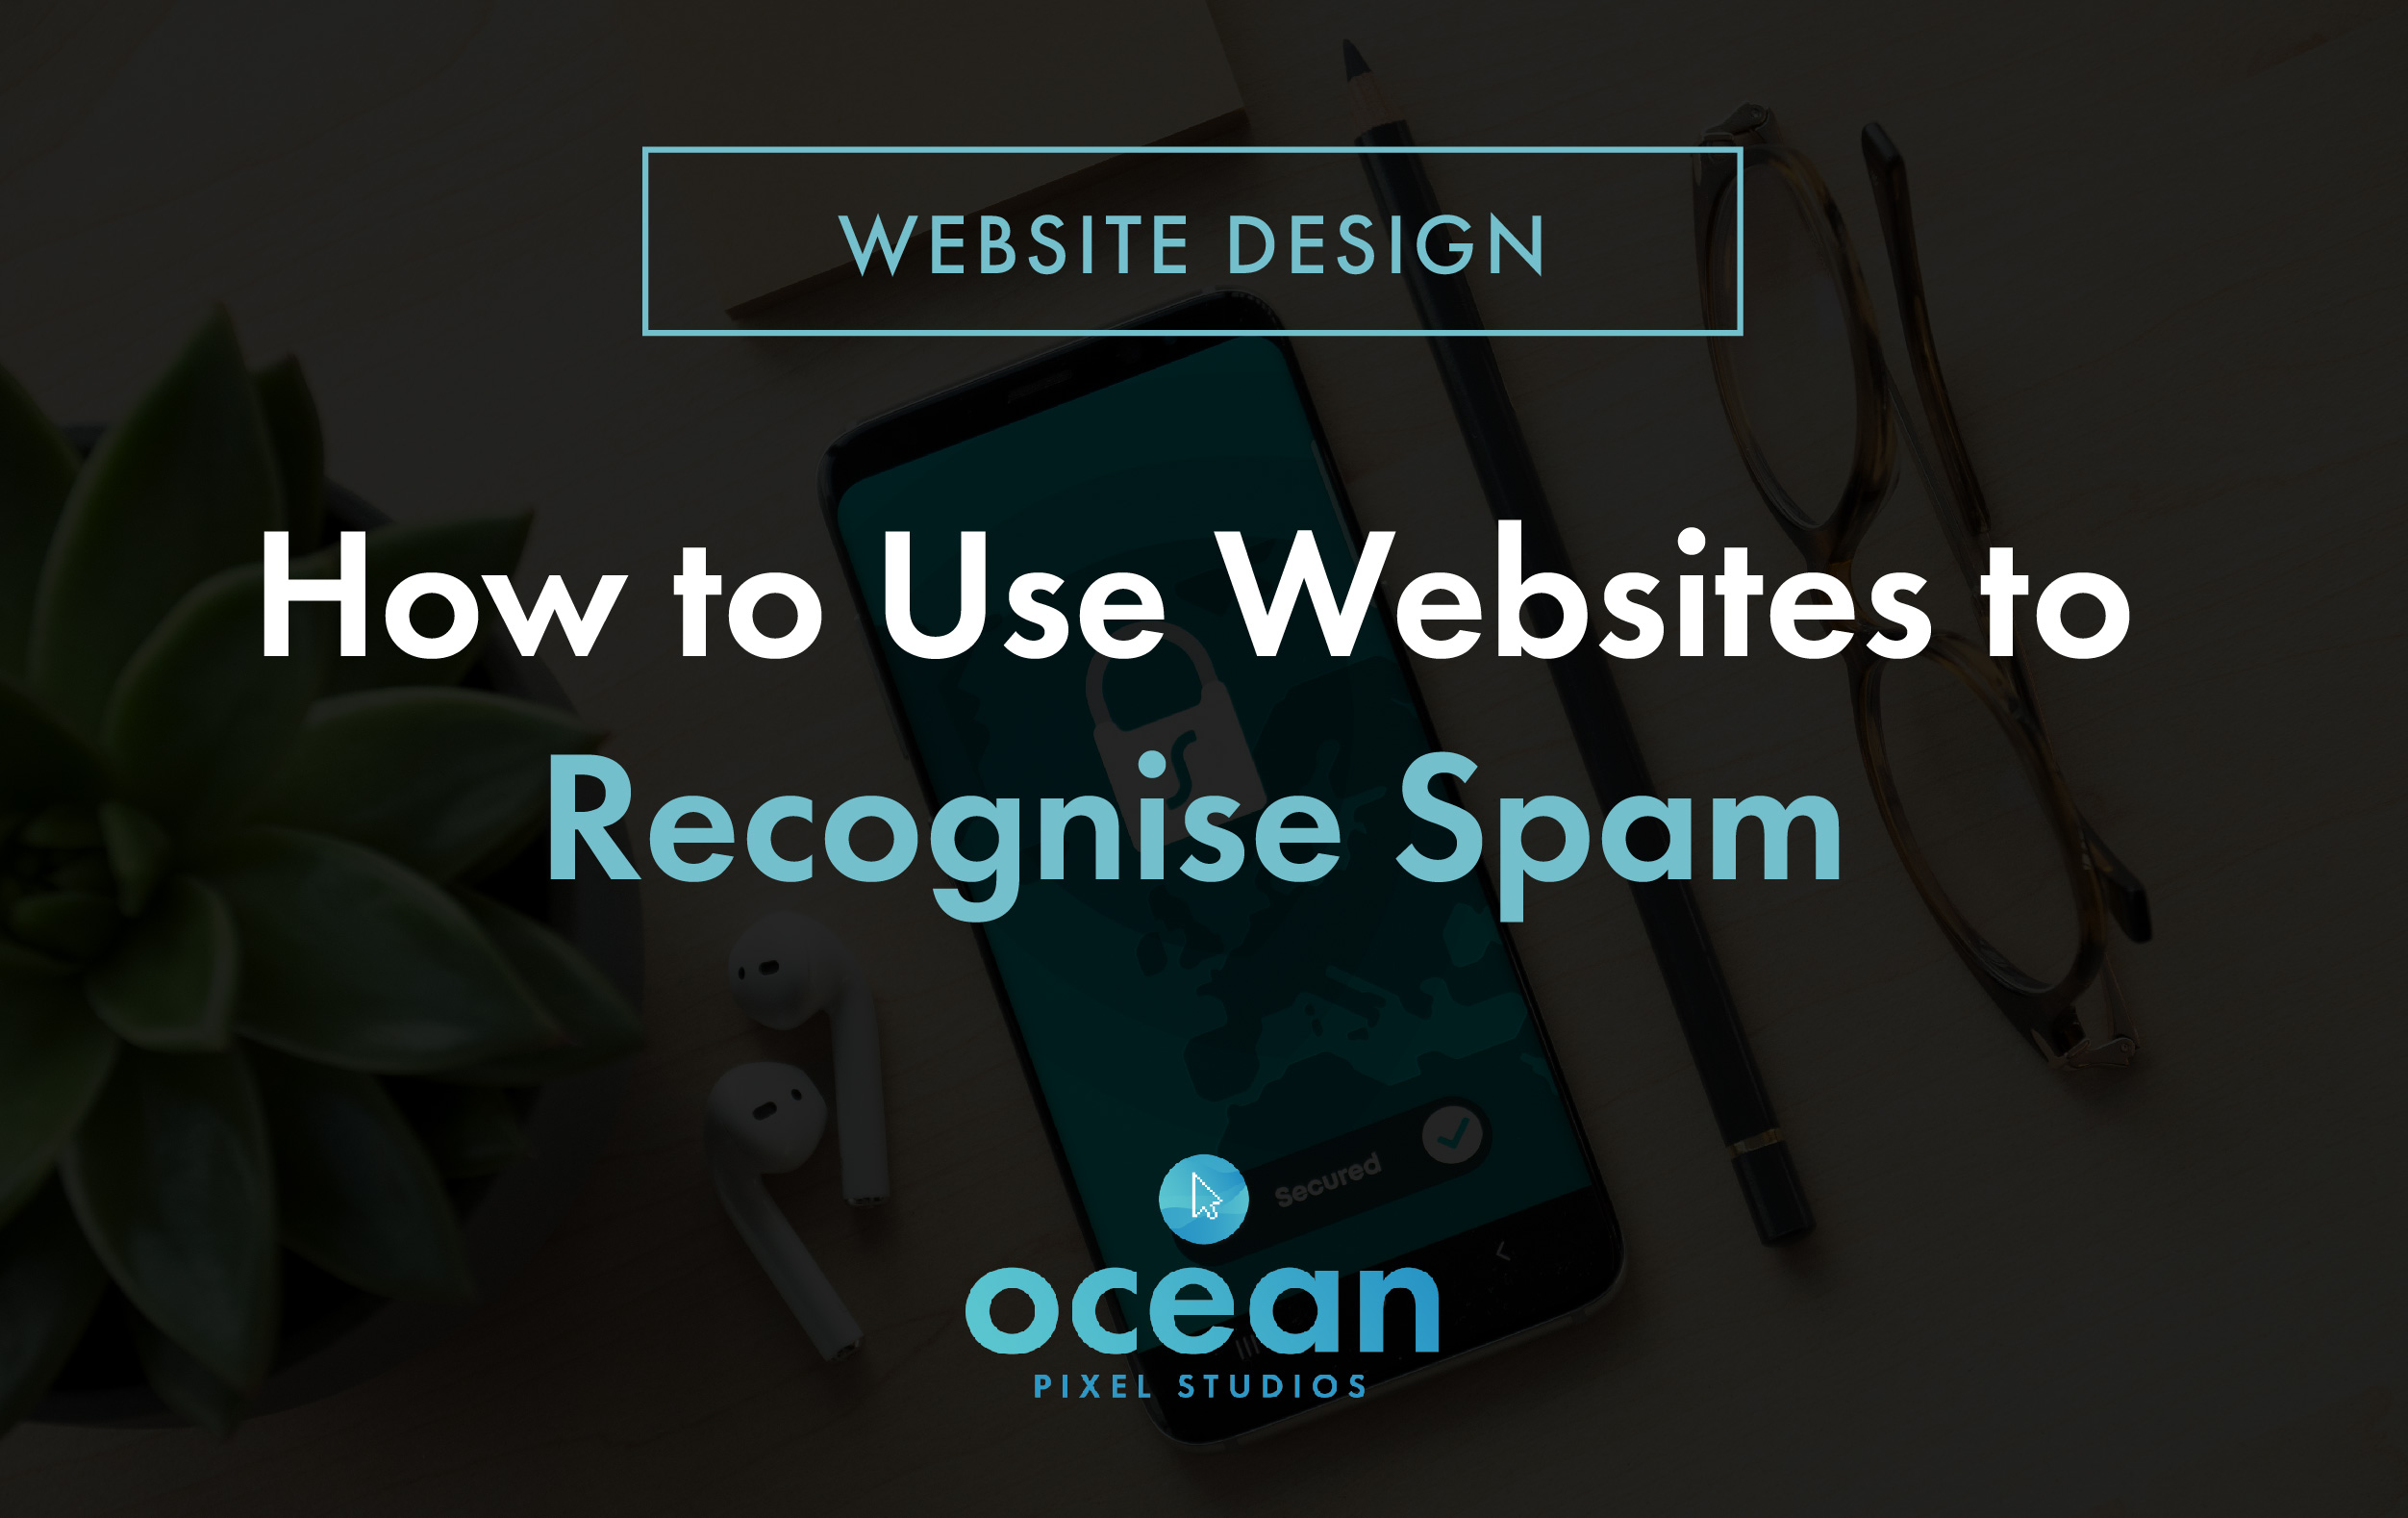 How To Use Websites to Recognise Spam